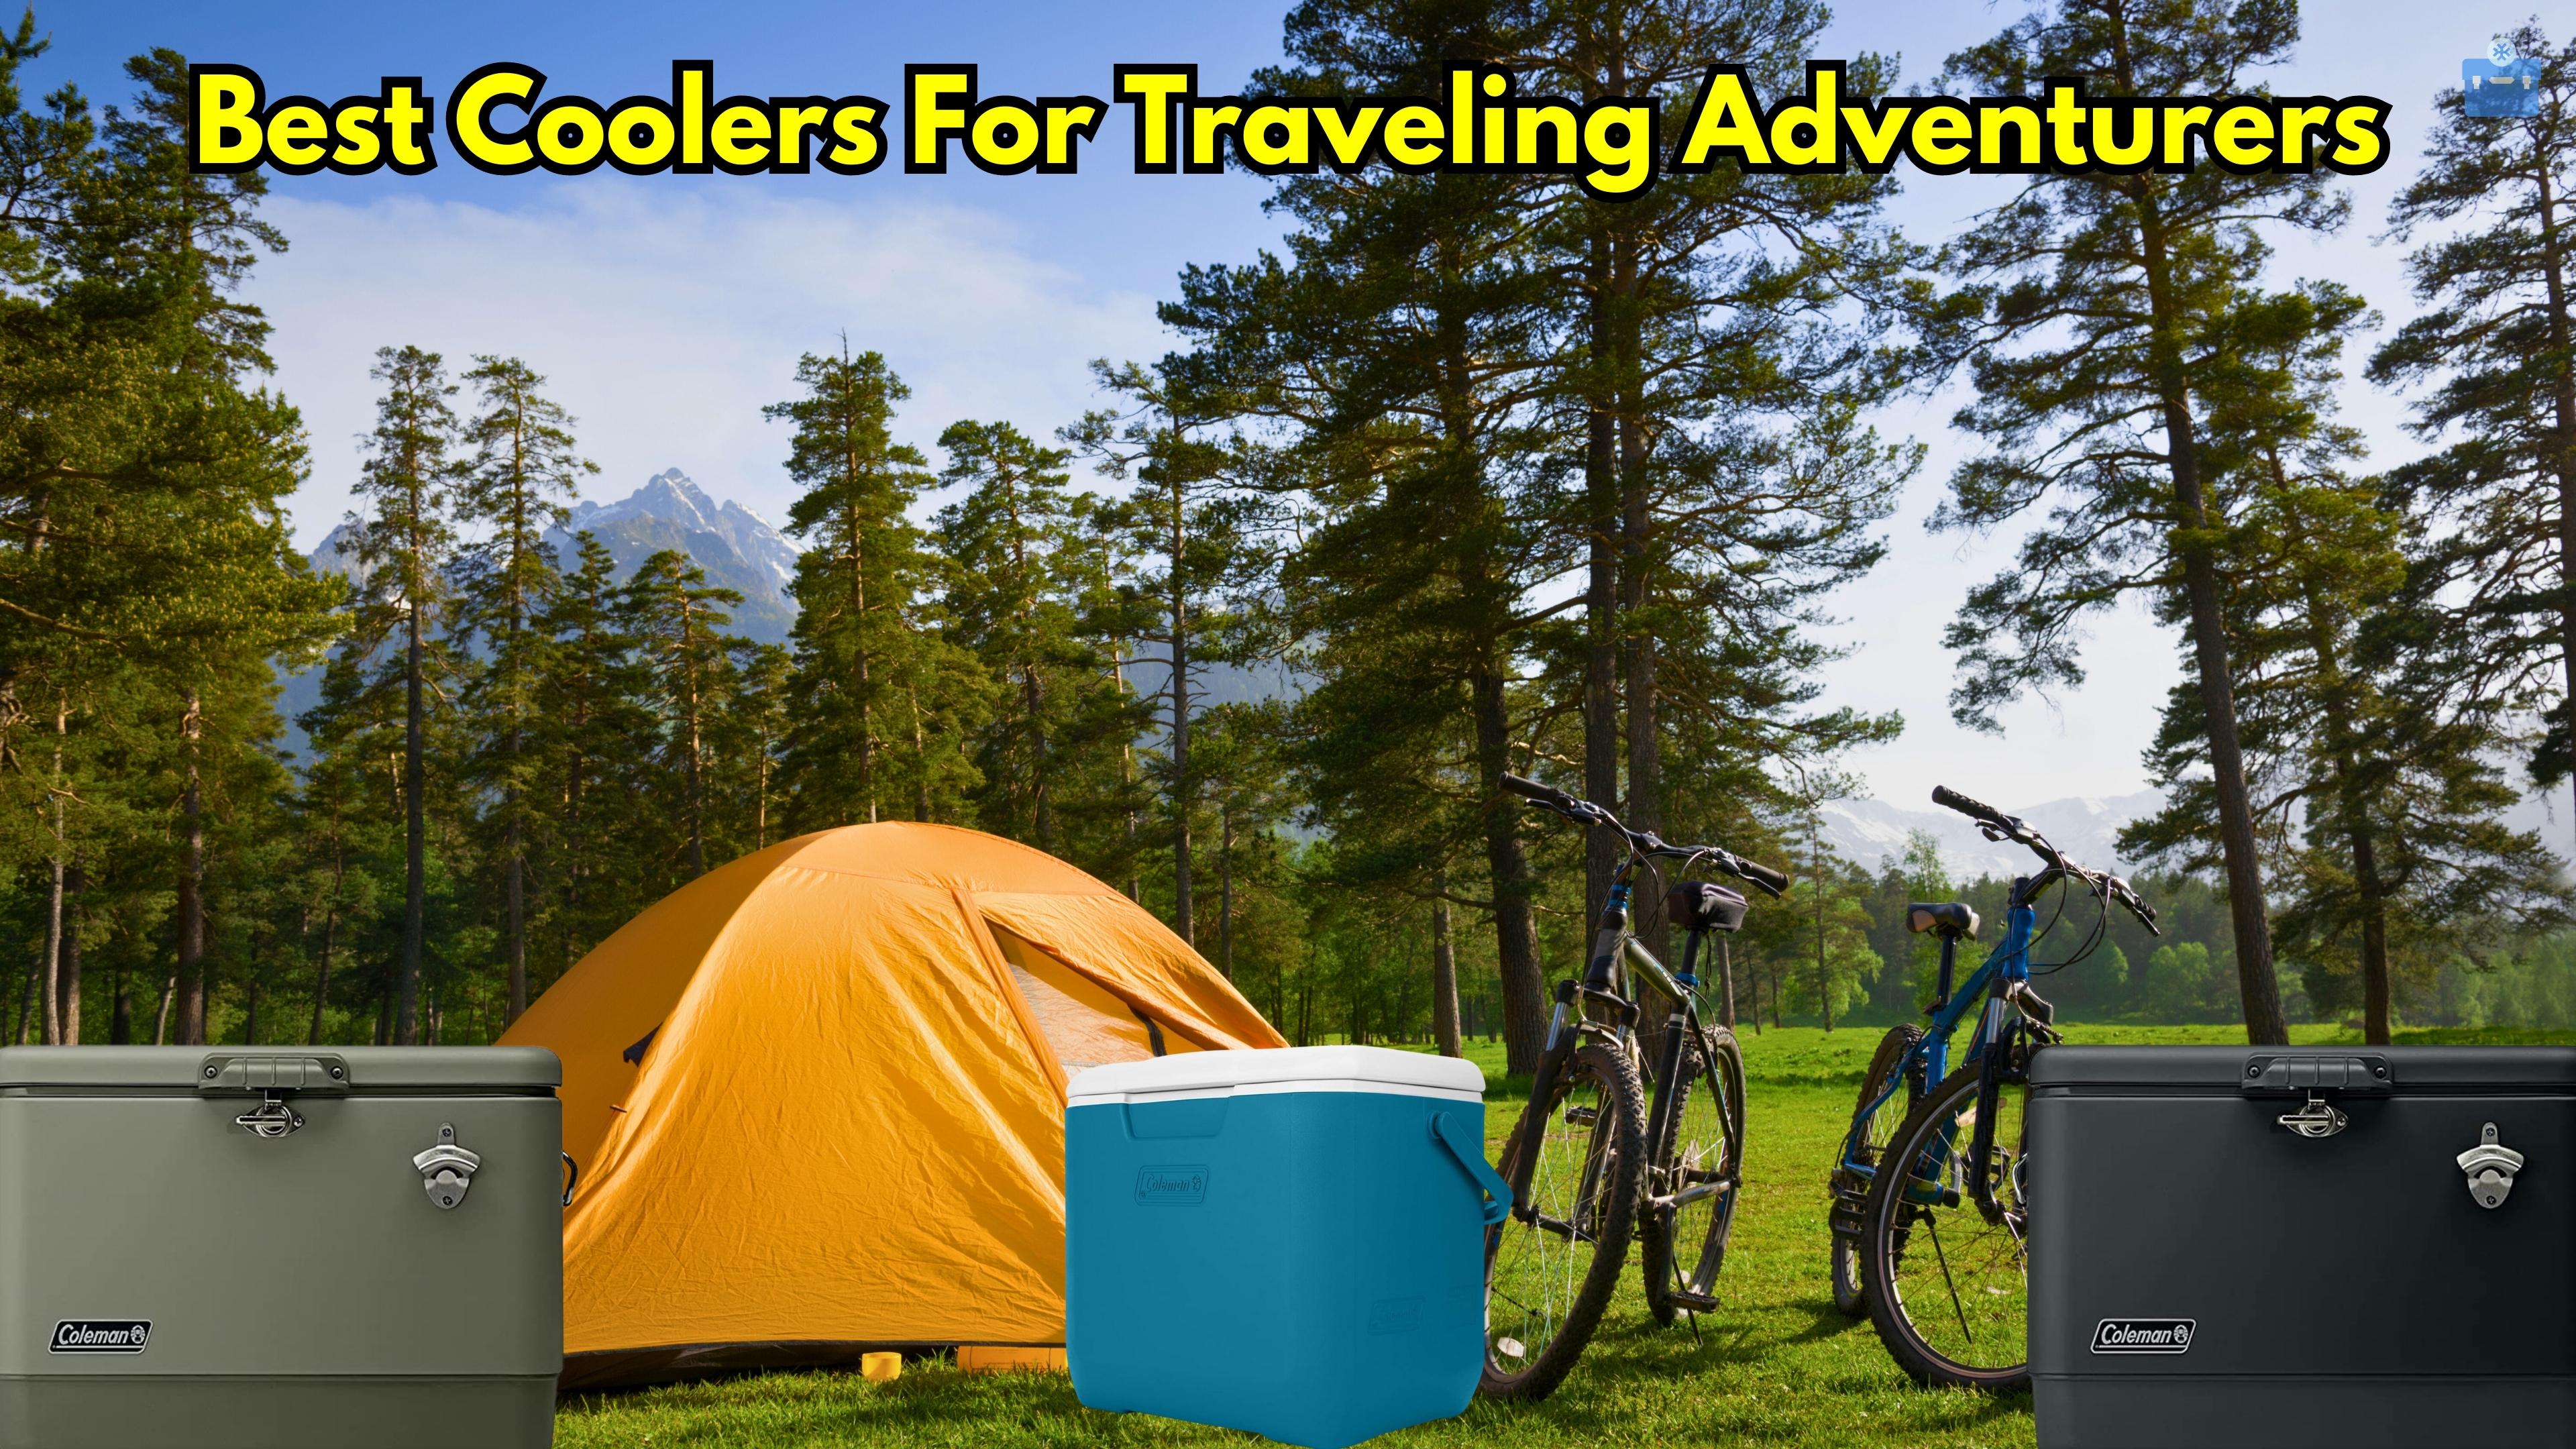 Best Coolers For Traveling Adventurers: Top 7 Of 2023